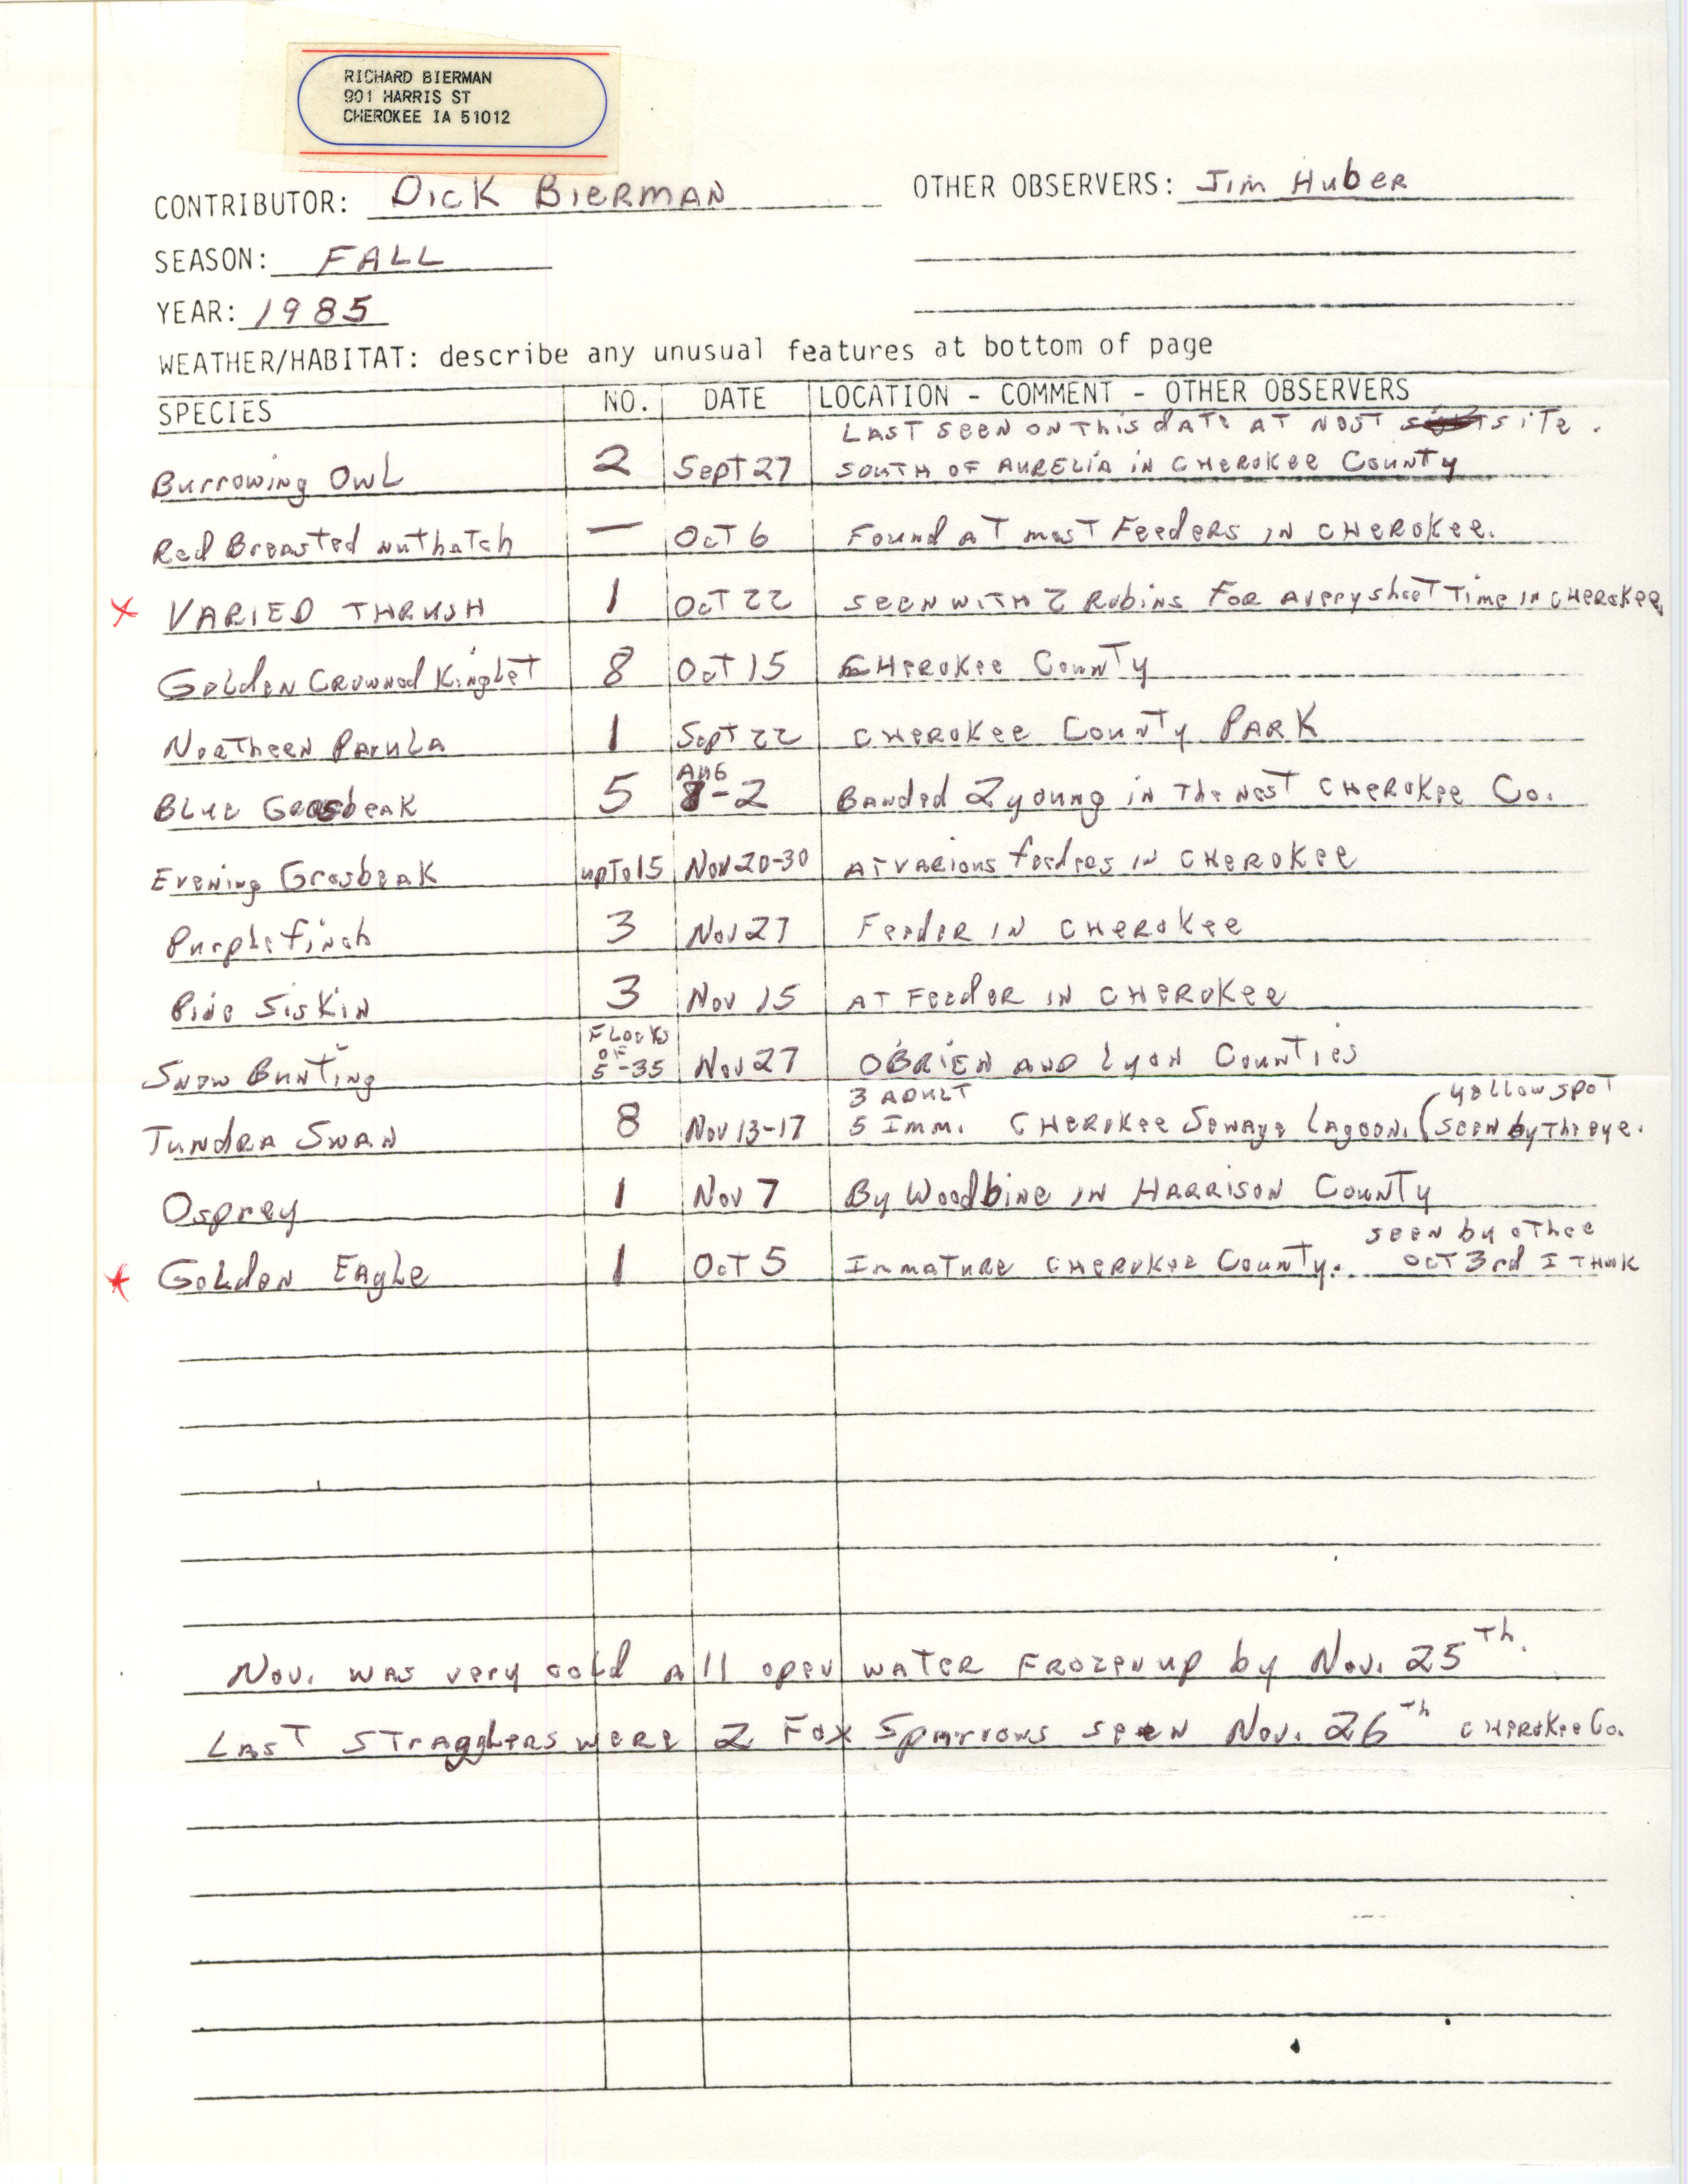 Annotated bird sighting list for Fall 1985 compiled by Dick Bierman